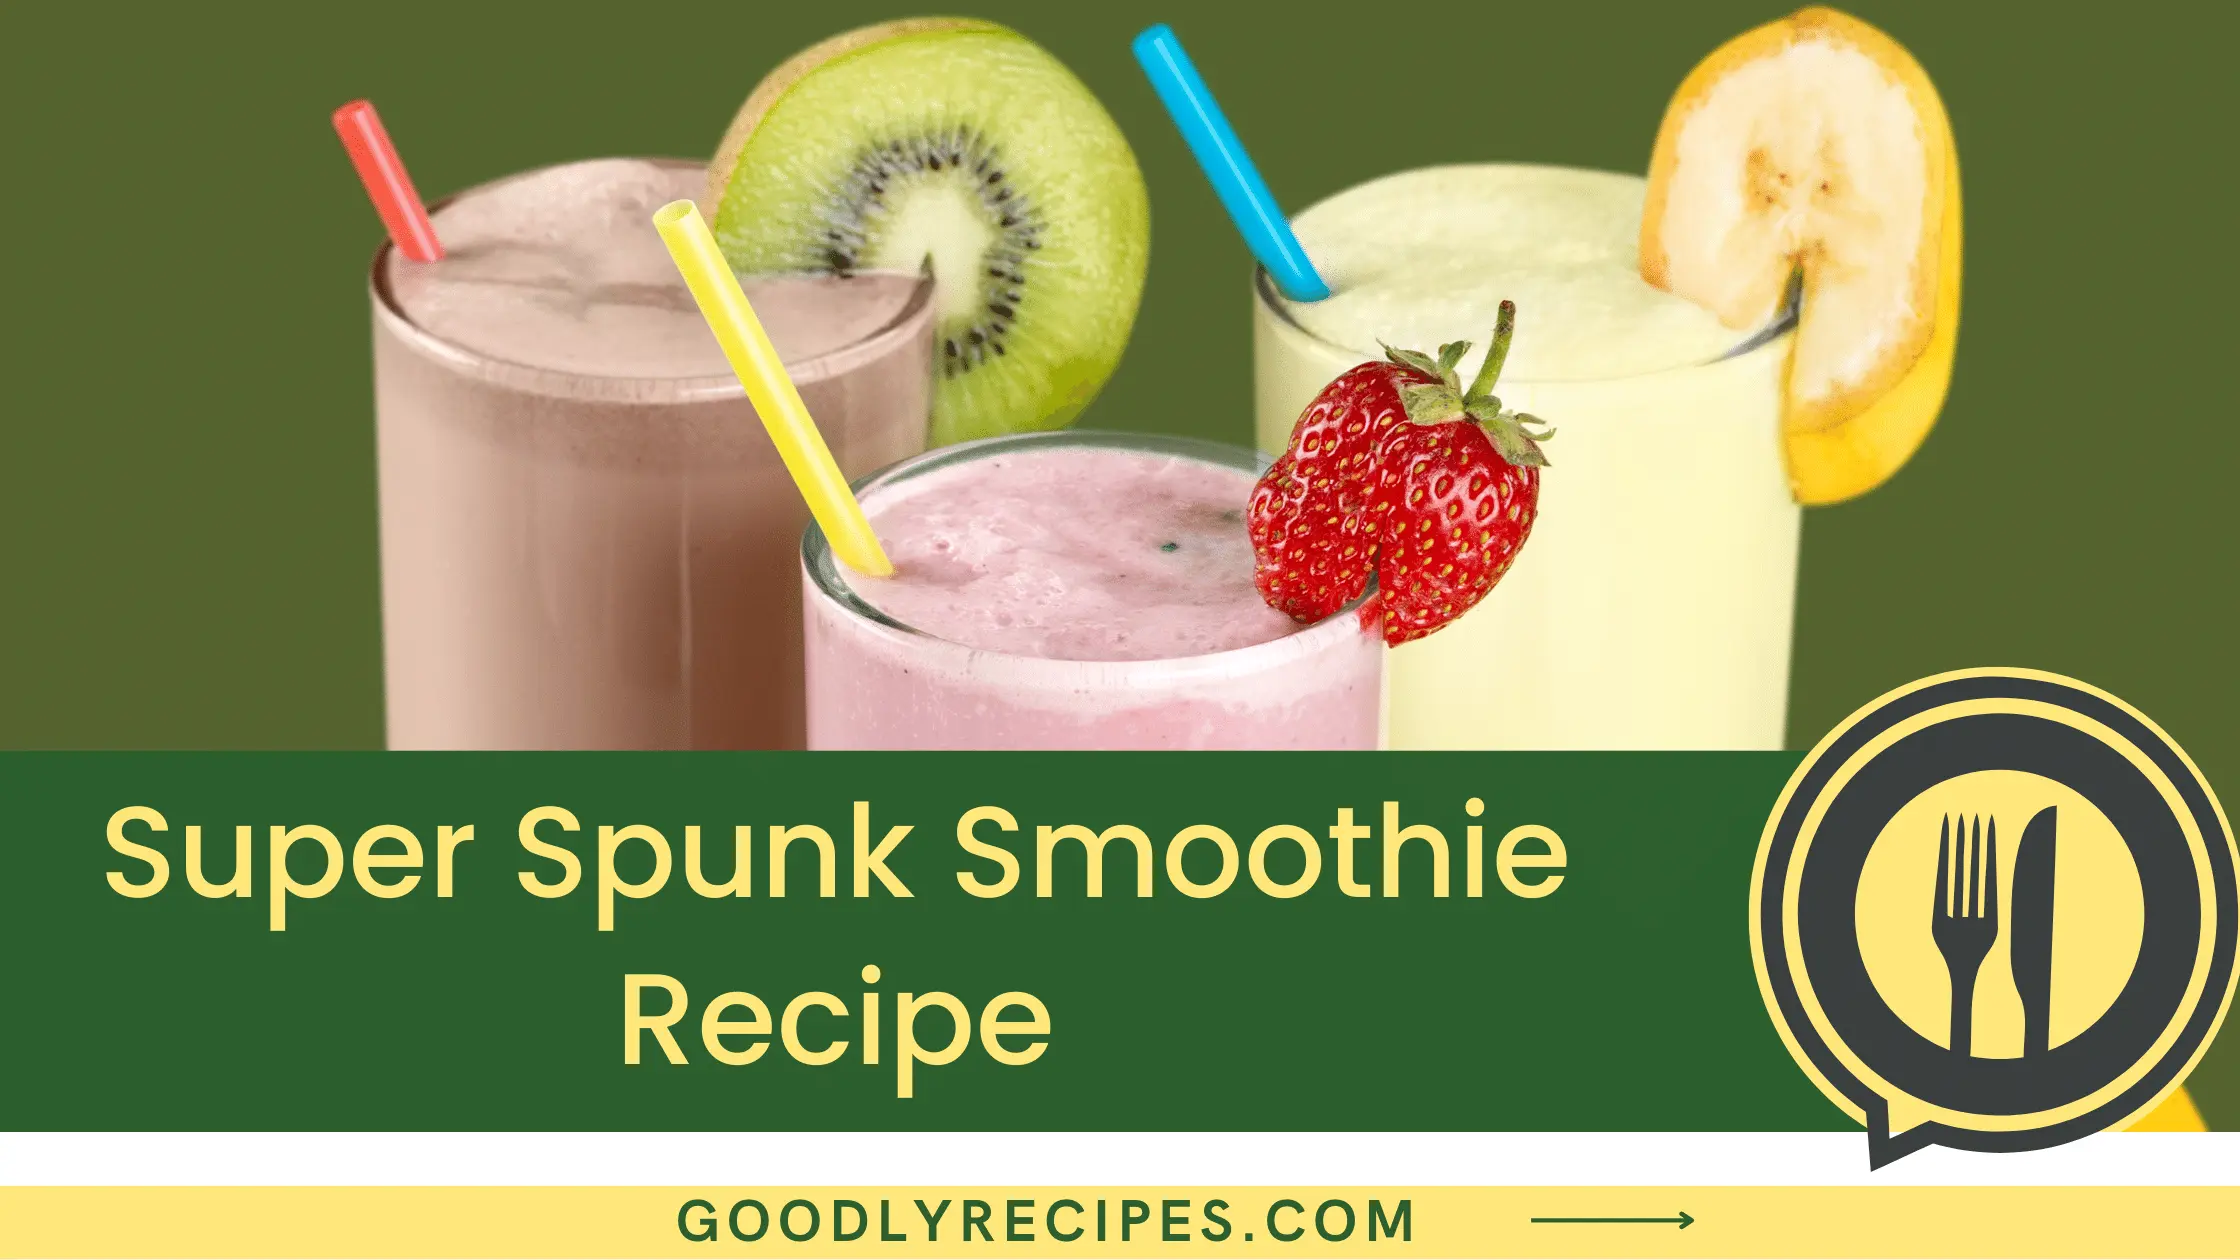 Super Spunk Smoothie Recipe - For Food Lovers